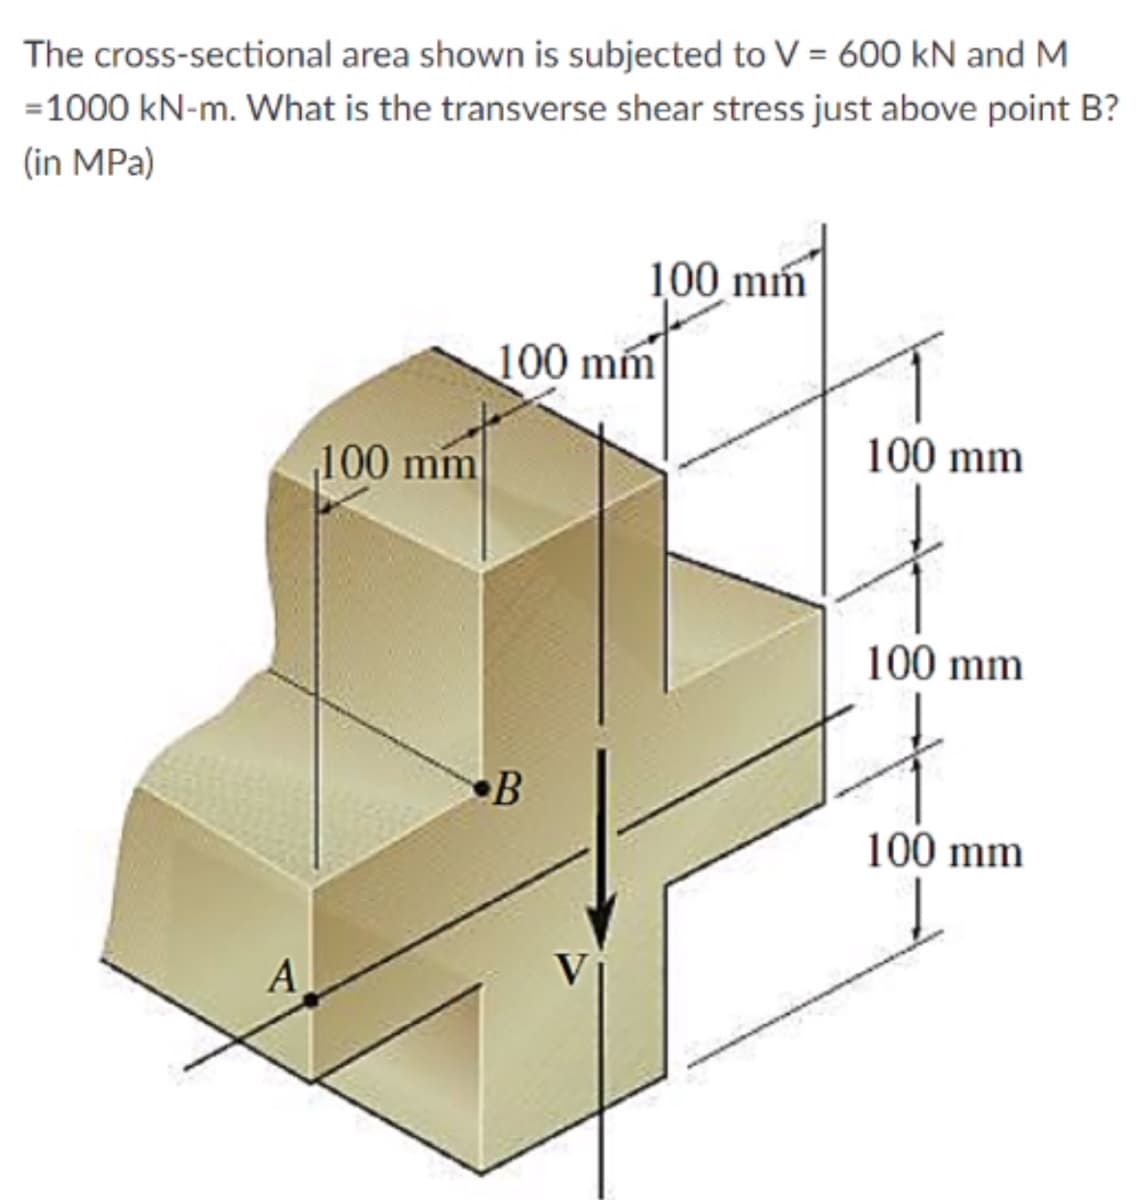 The cross-sectional area shown is subjected to V = 600 kN and M
=1000 kN-m. What is the transverse shear stress just above point B?
(in MPa)
100 mm
100 mm
100 mm
100 mm
100 mm
B
100 mm
A
V
